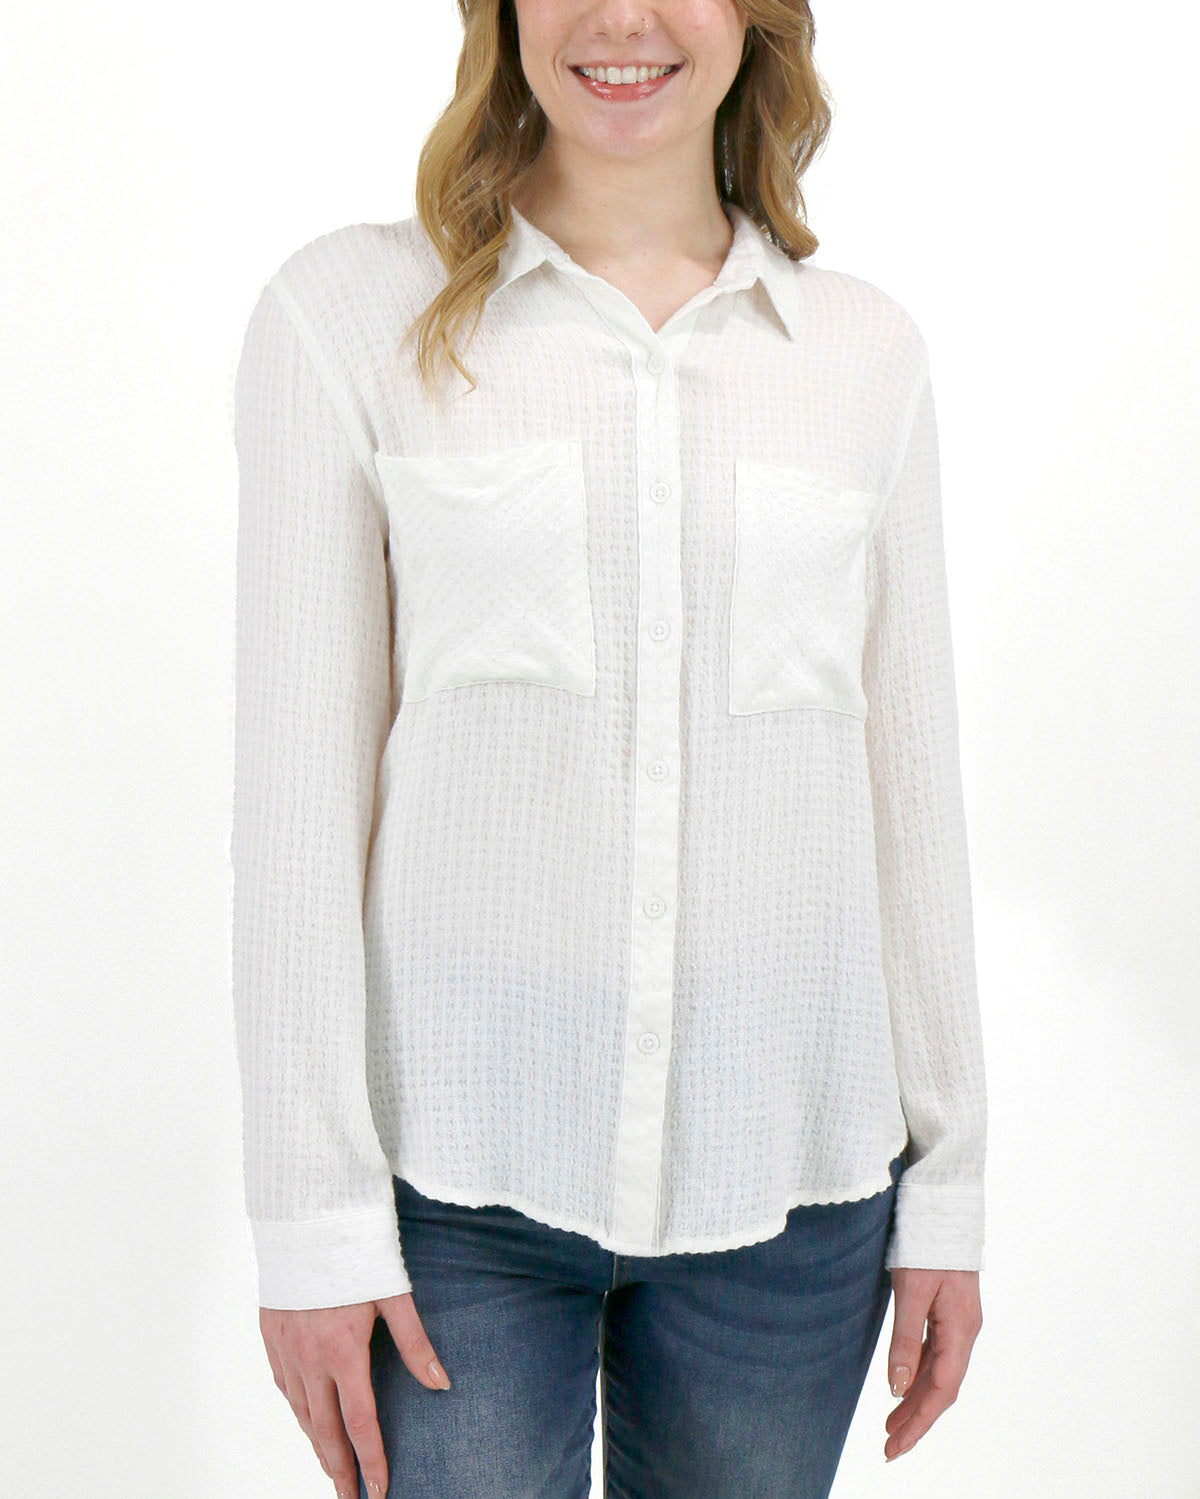 Favorite Button Up Top in Soft White